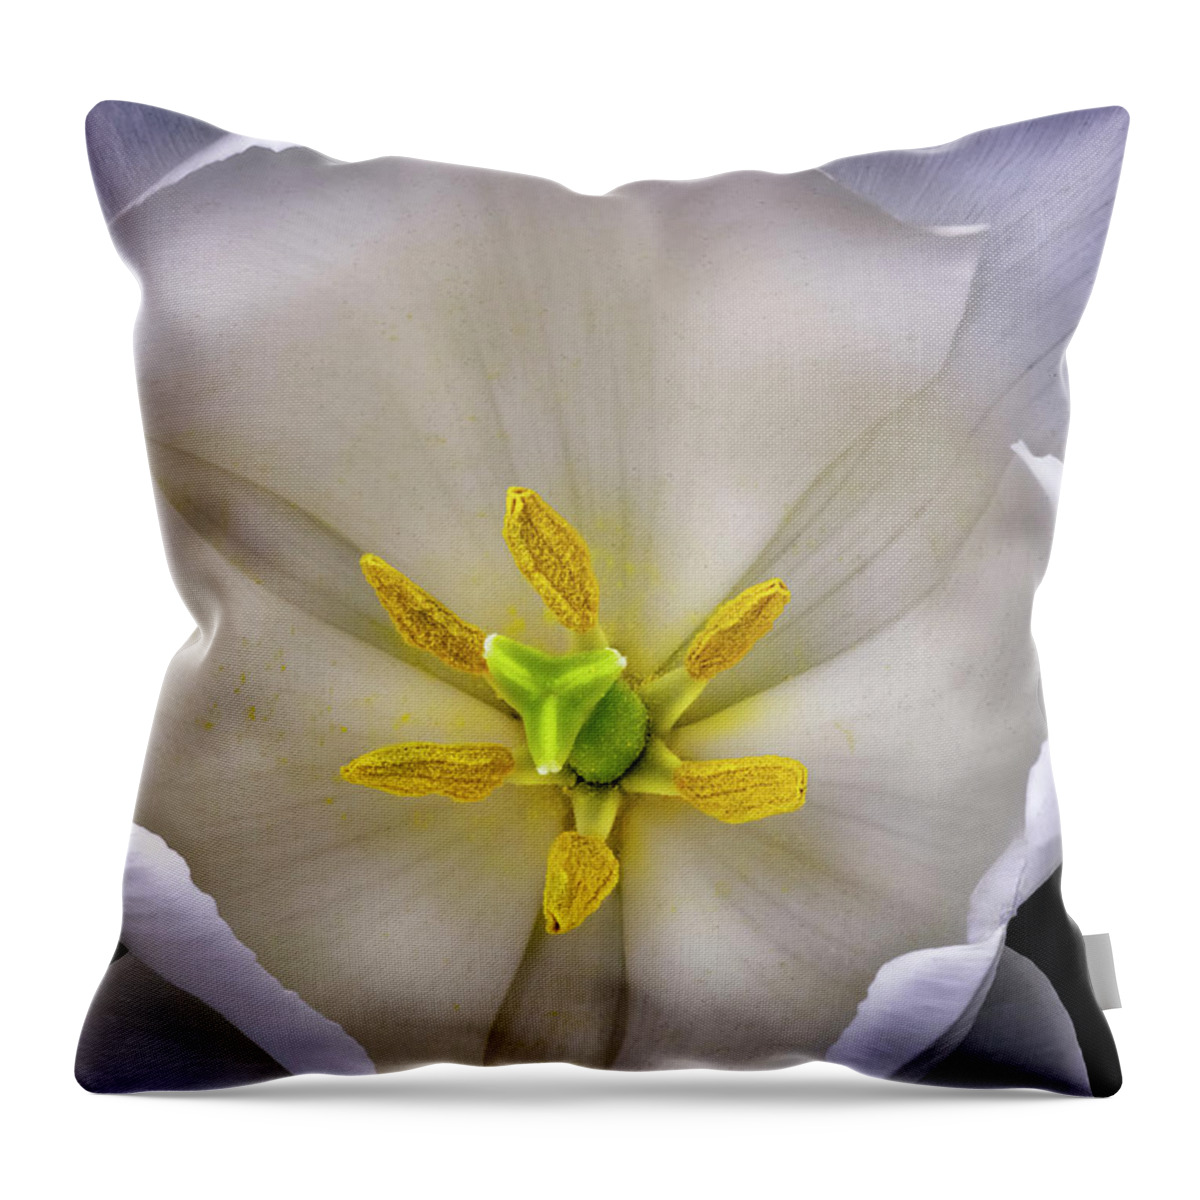 White Tulip Throw Pillow featuring the photograph Center Of A Tulip by Endre Balogh